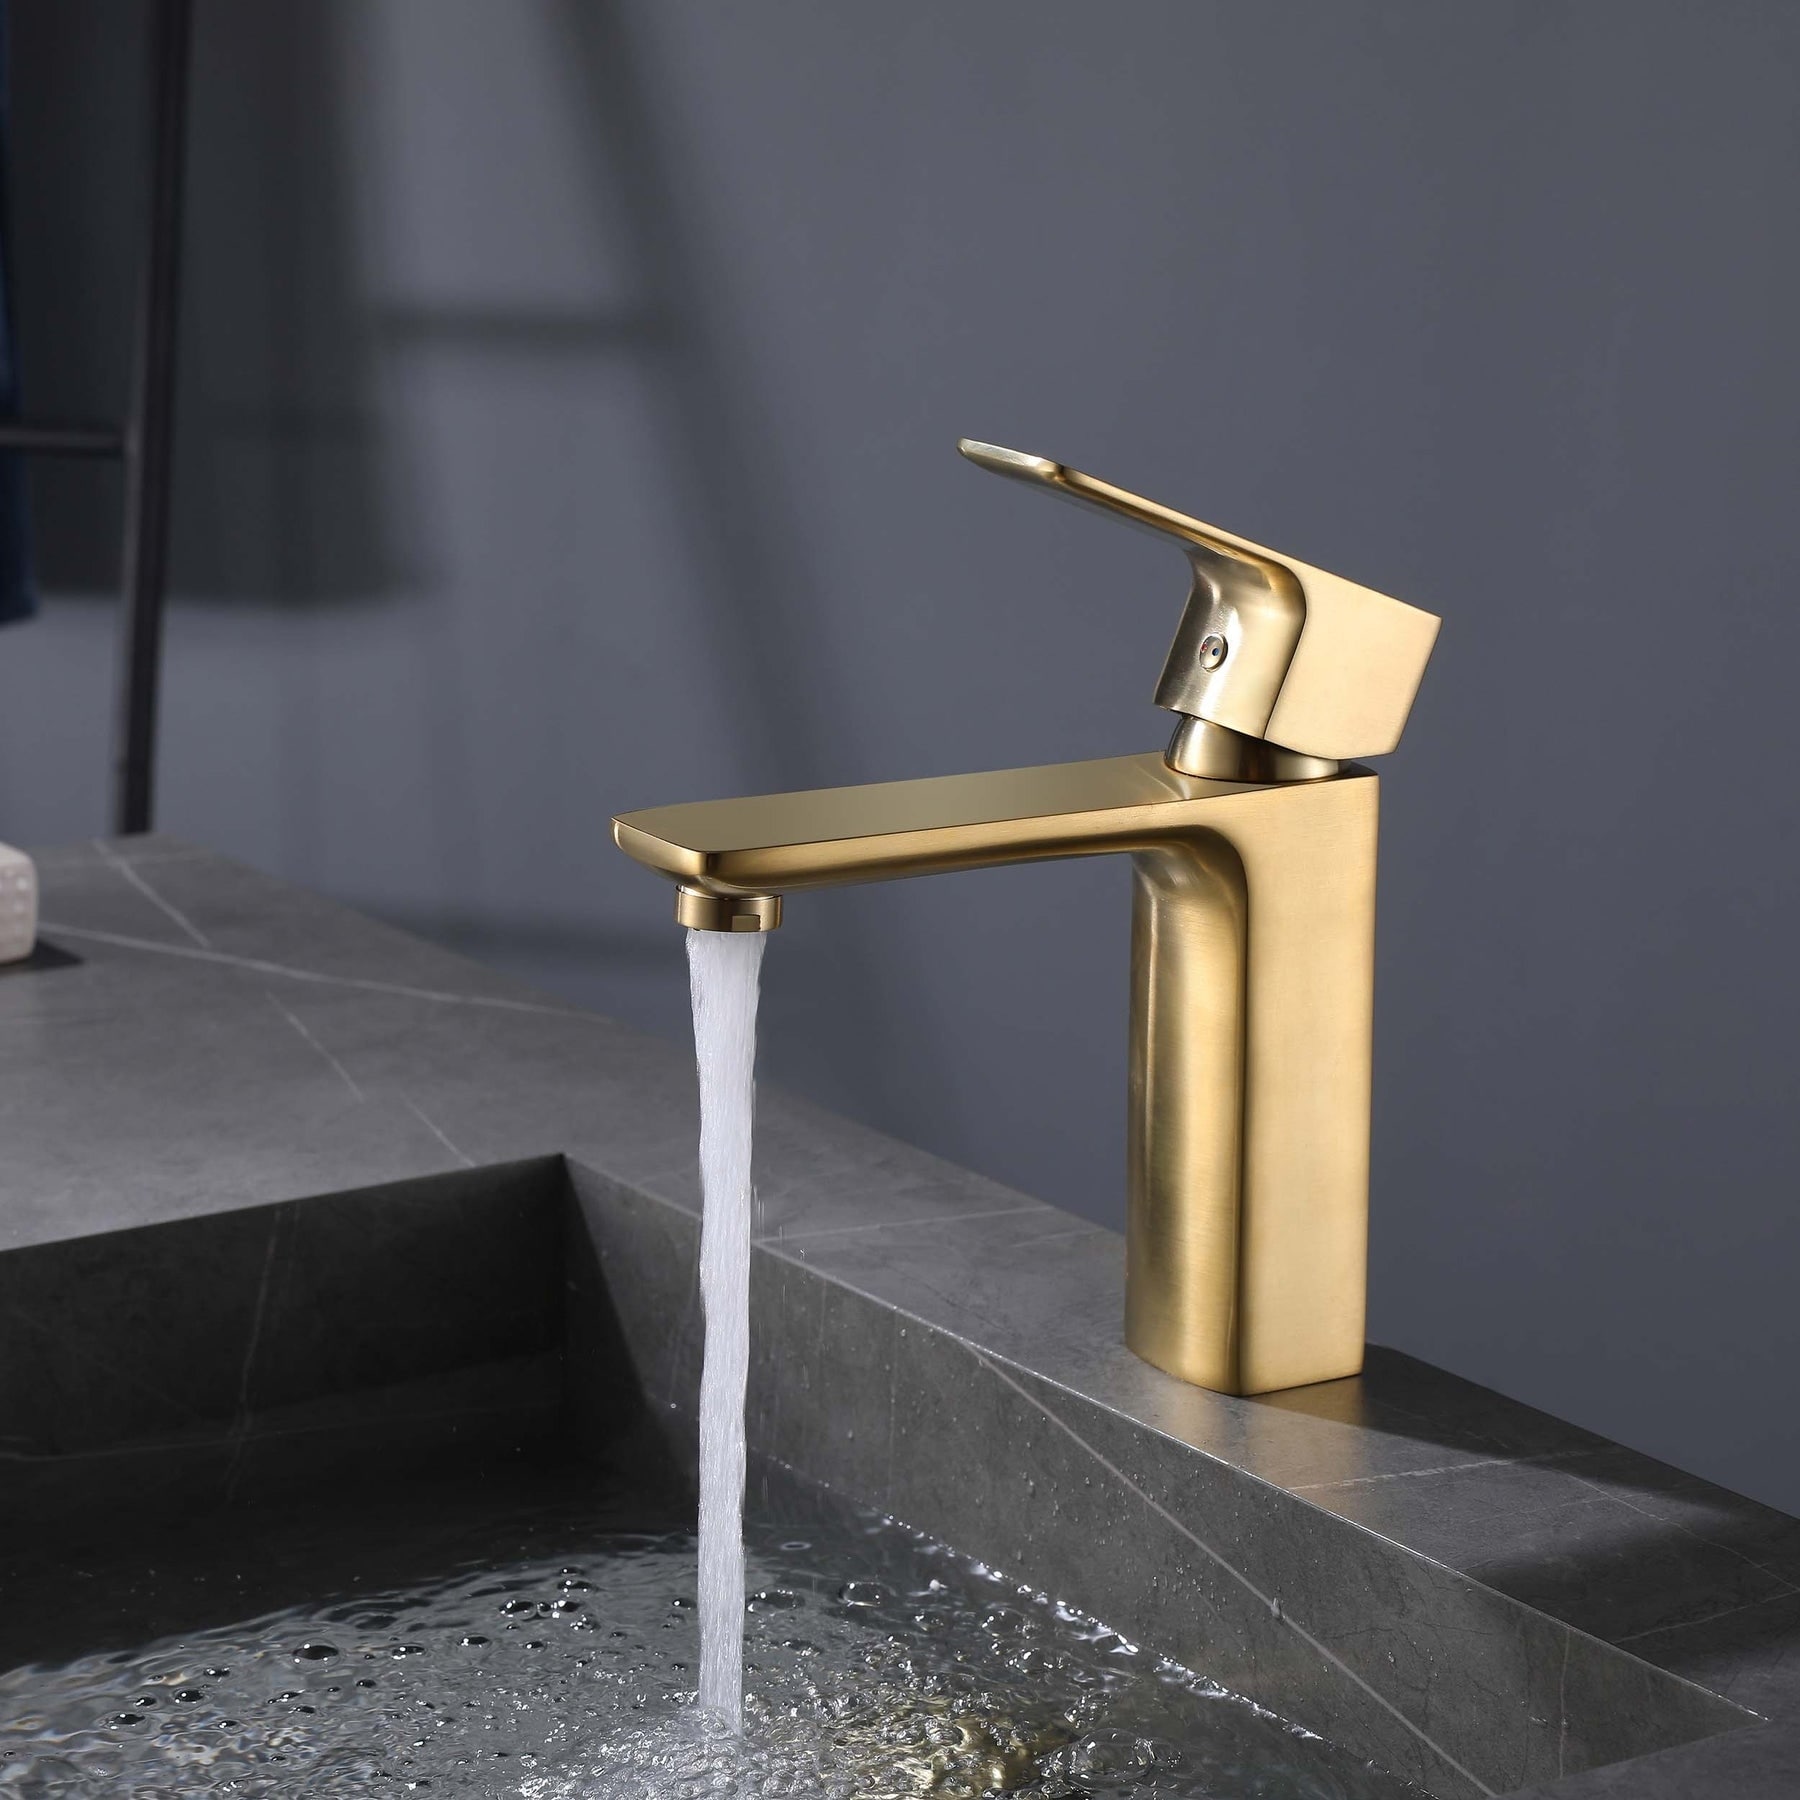 TRUSTMI Gold Bathroom Sink Faucet with Overflow Pop Up Drain Assembly Brushed Gold Single Handle Brass Hot Cold Tap with 6-Inch Deck Plate 